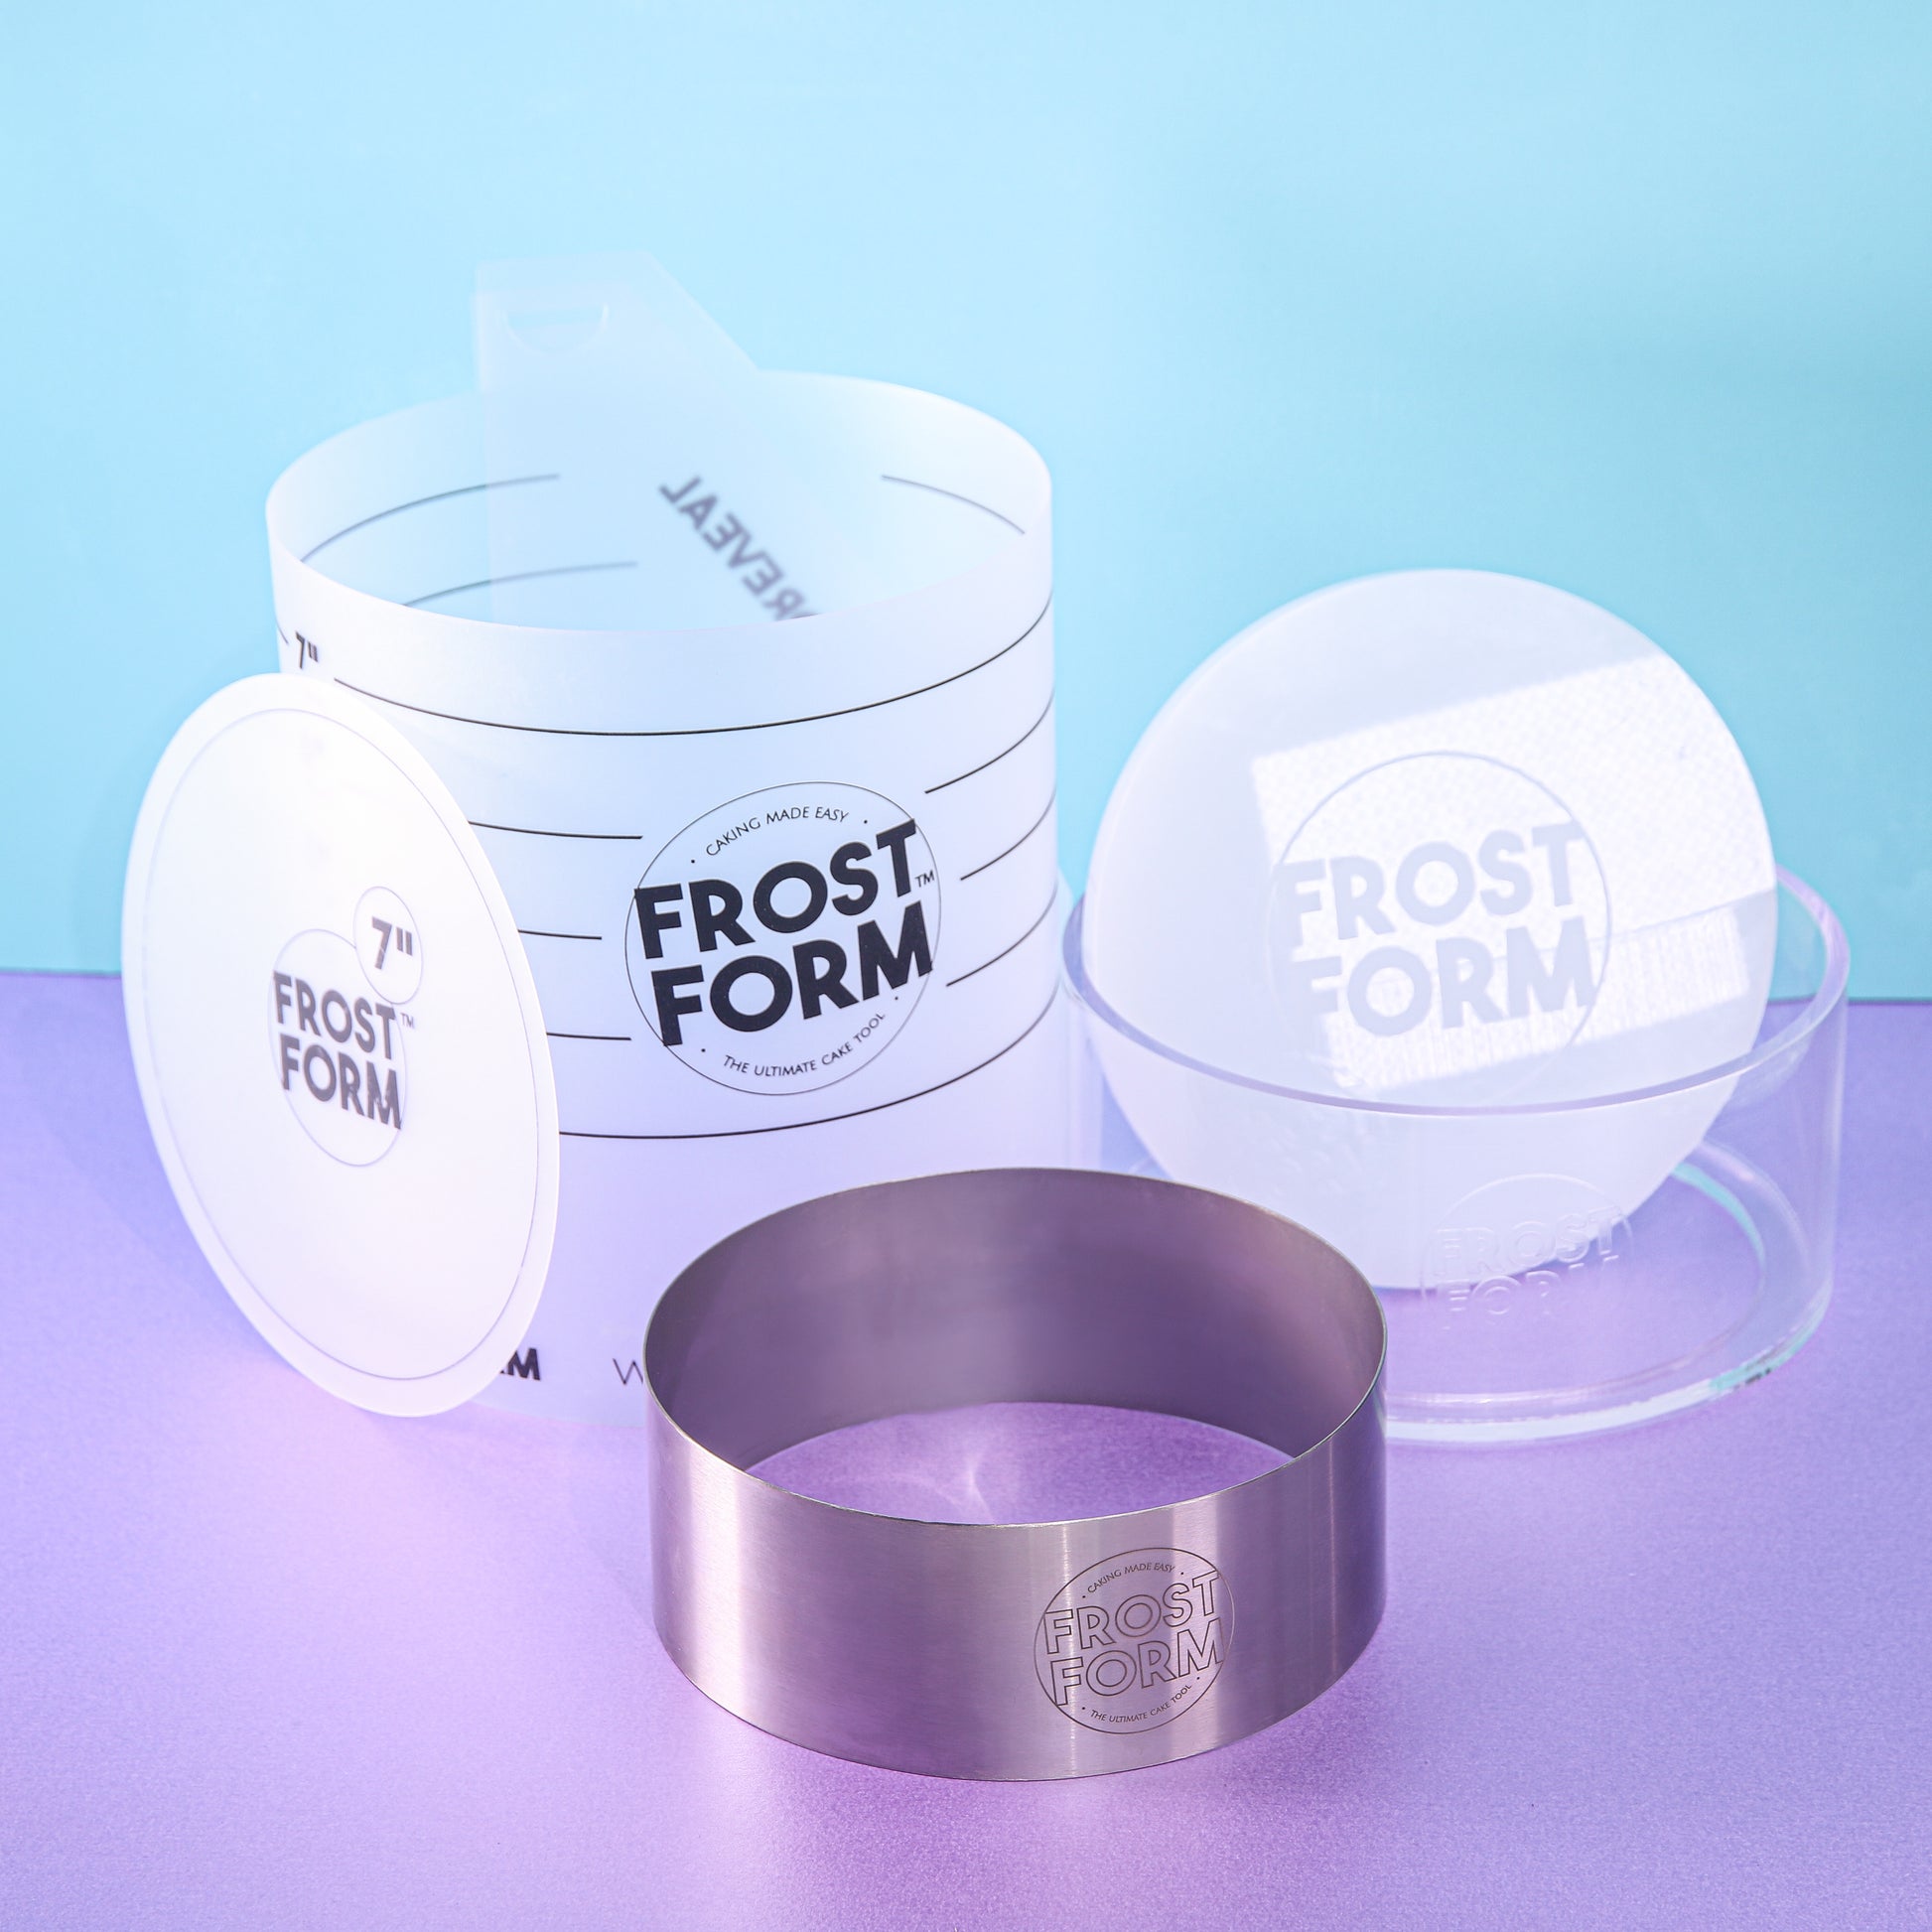 Frost Form - Starter + Kit (8 inch) 7-Piece Set | Professional-Quality,  Food-Grade Plastic | Cake Frosting | Beginners and Pros | Cake Decorating  Kit